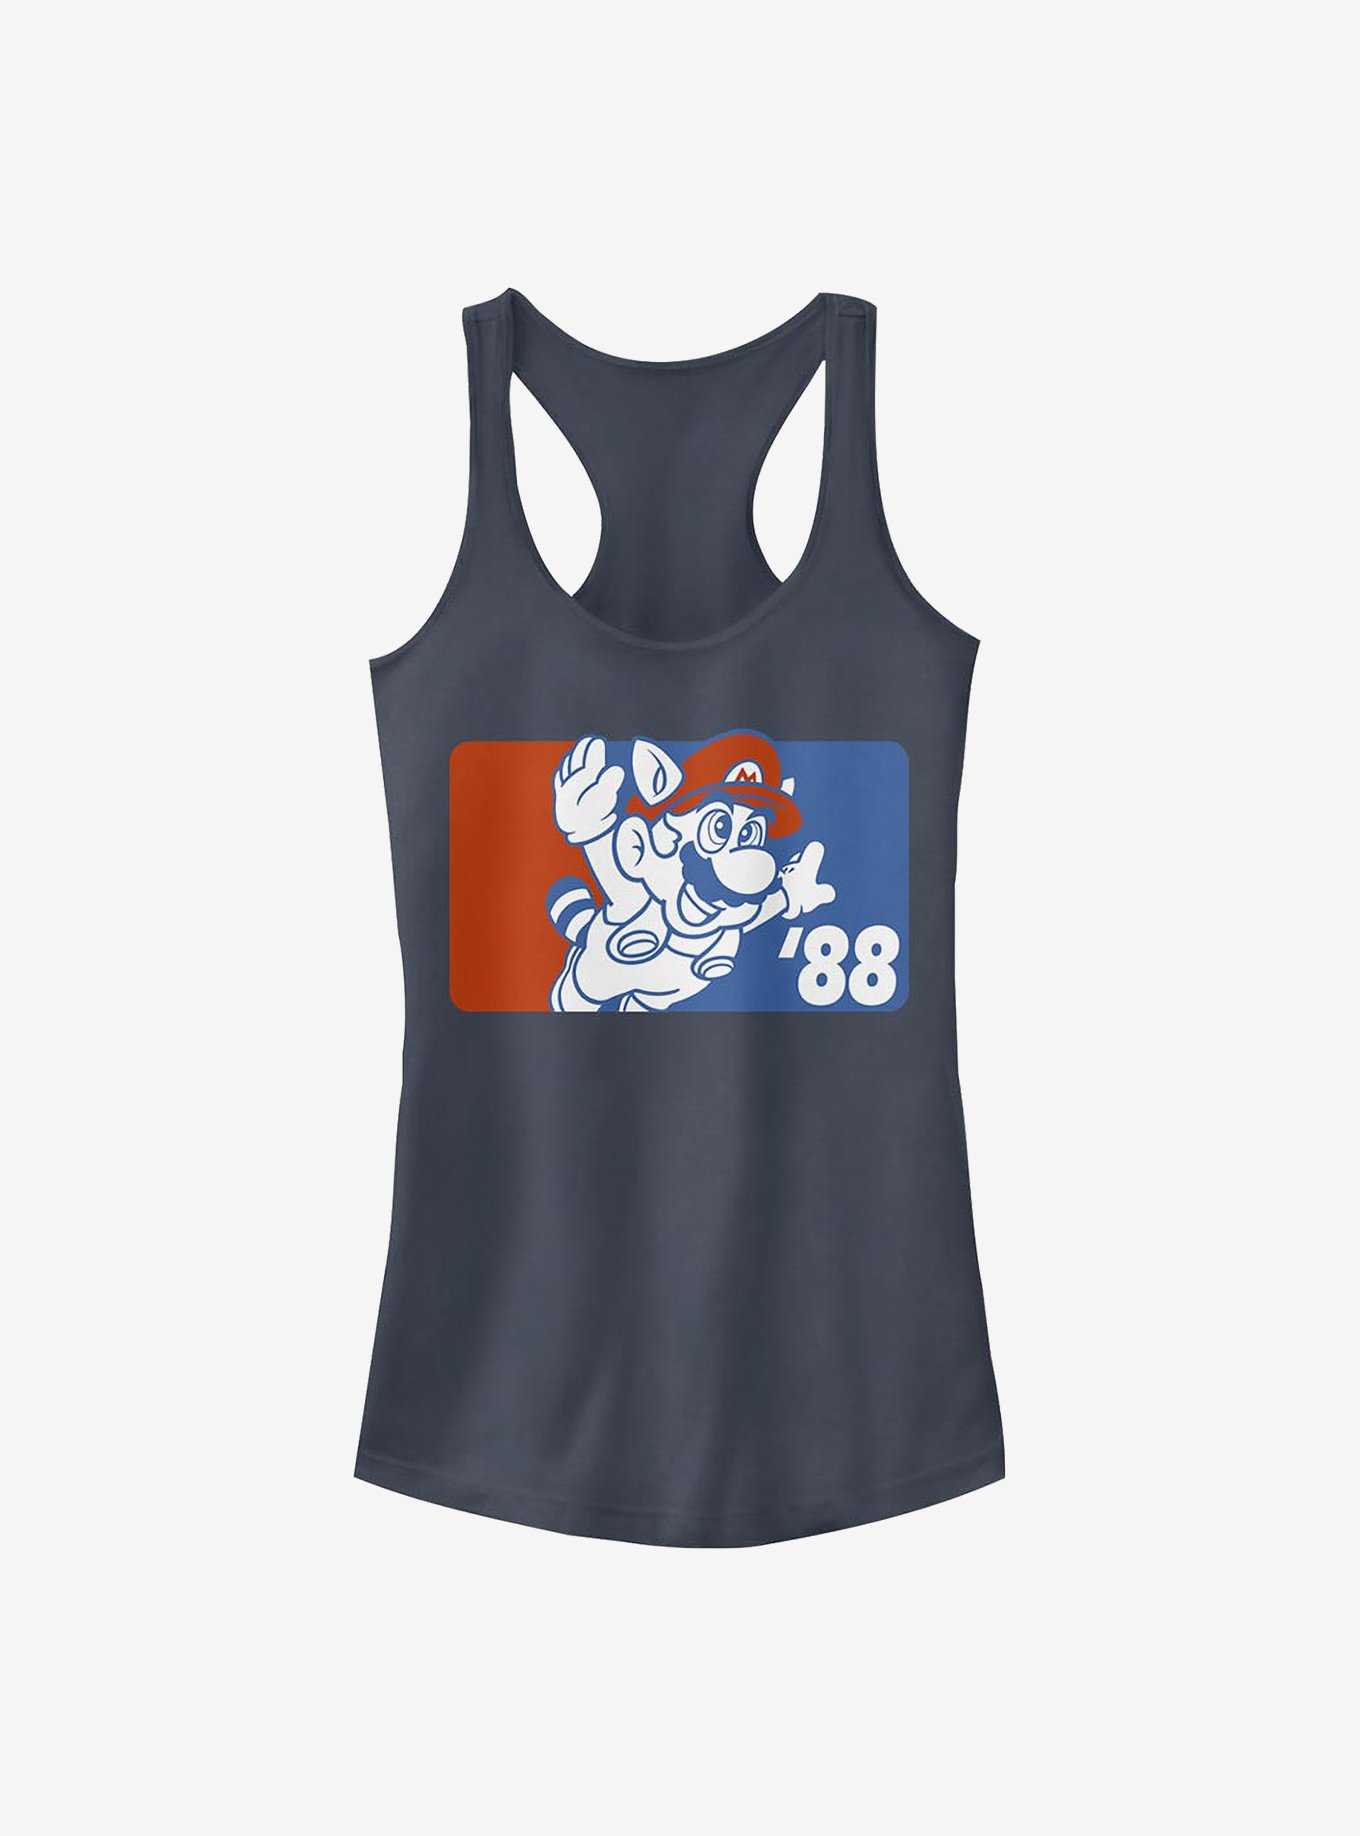 Nintendo Mario Red And Blue Fly Guy Girls Tank, , hi-res